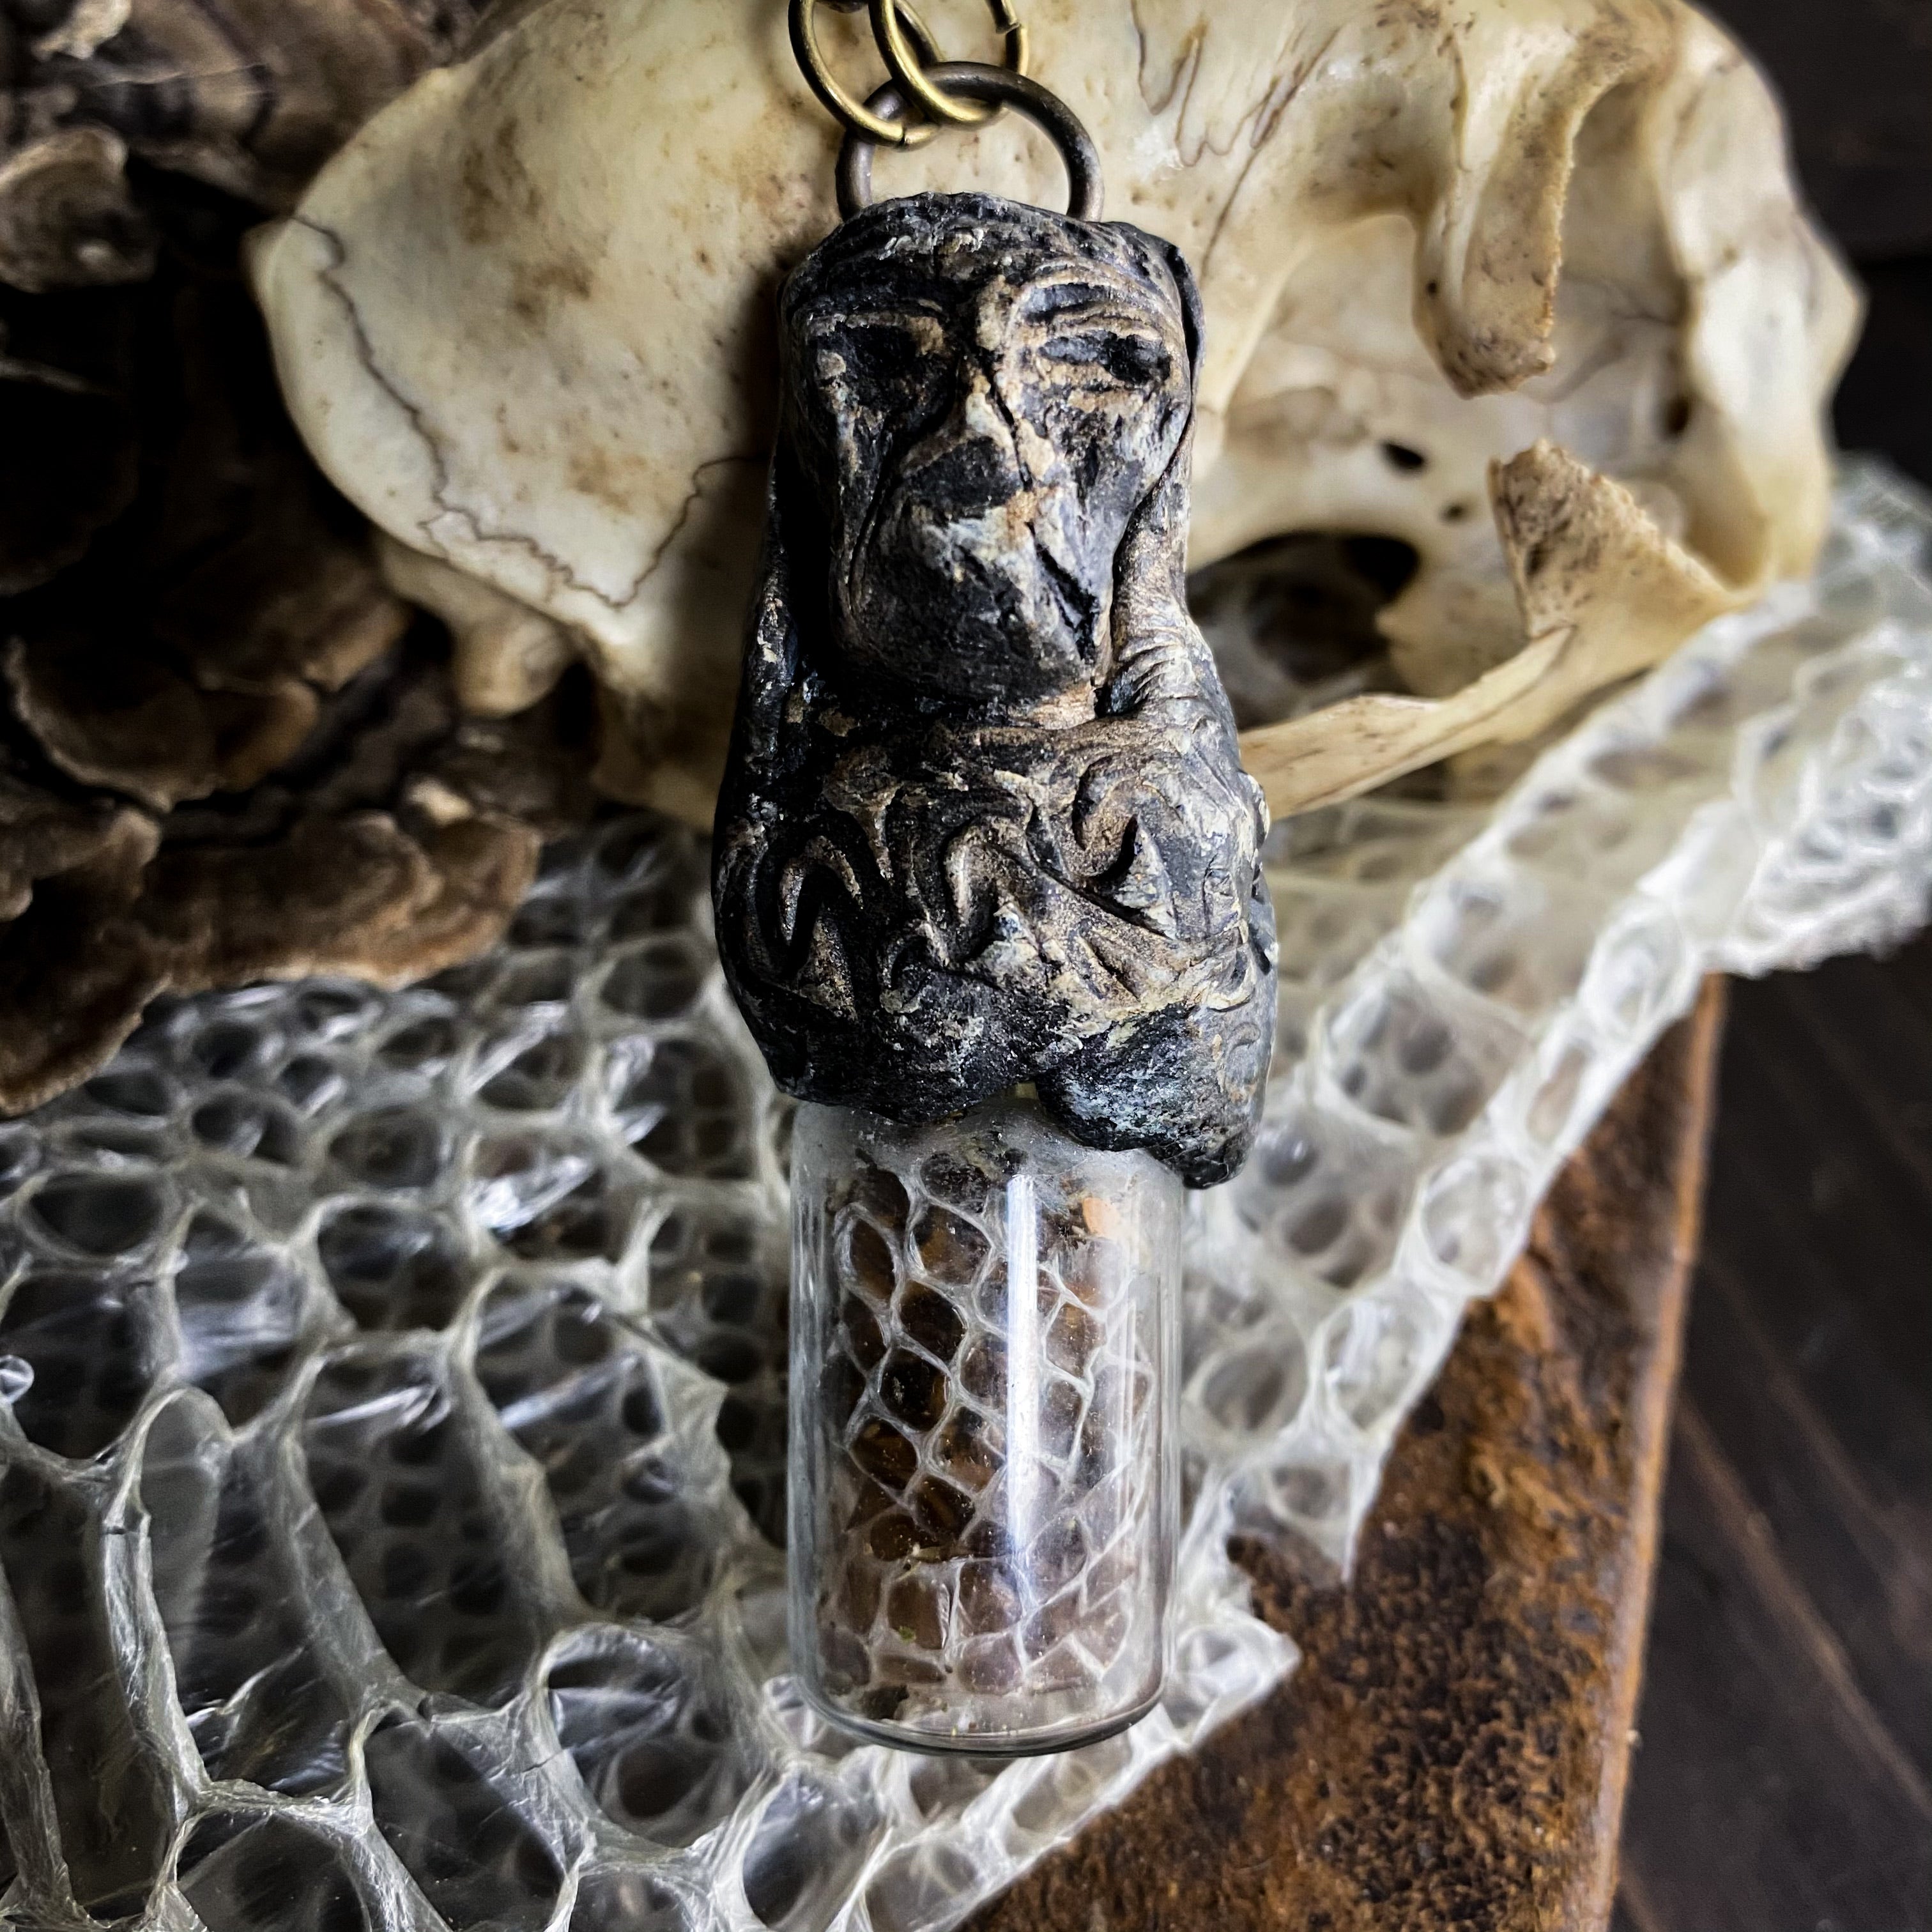 Gatekeeper Necklace with Snake Skin and Mandrake Root